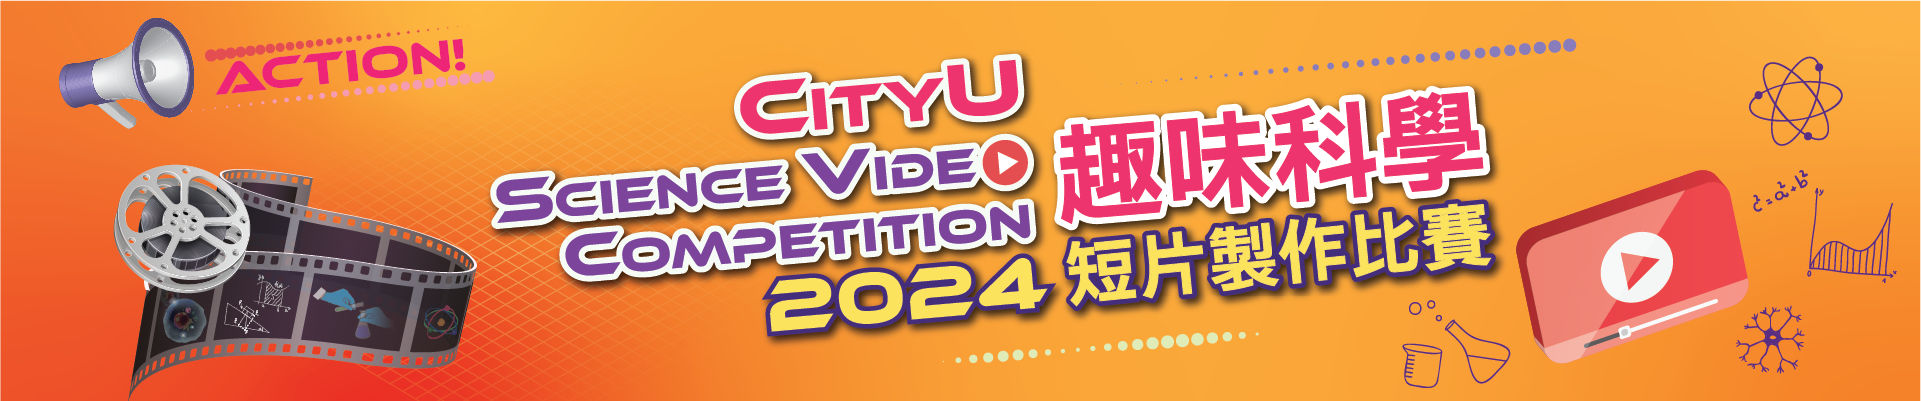 CityU Science Video Competition 2024